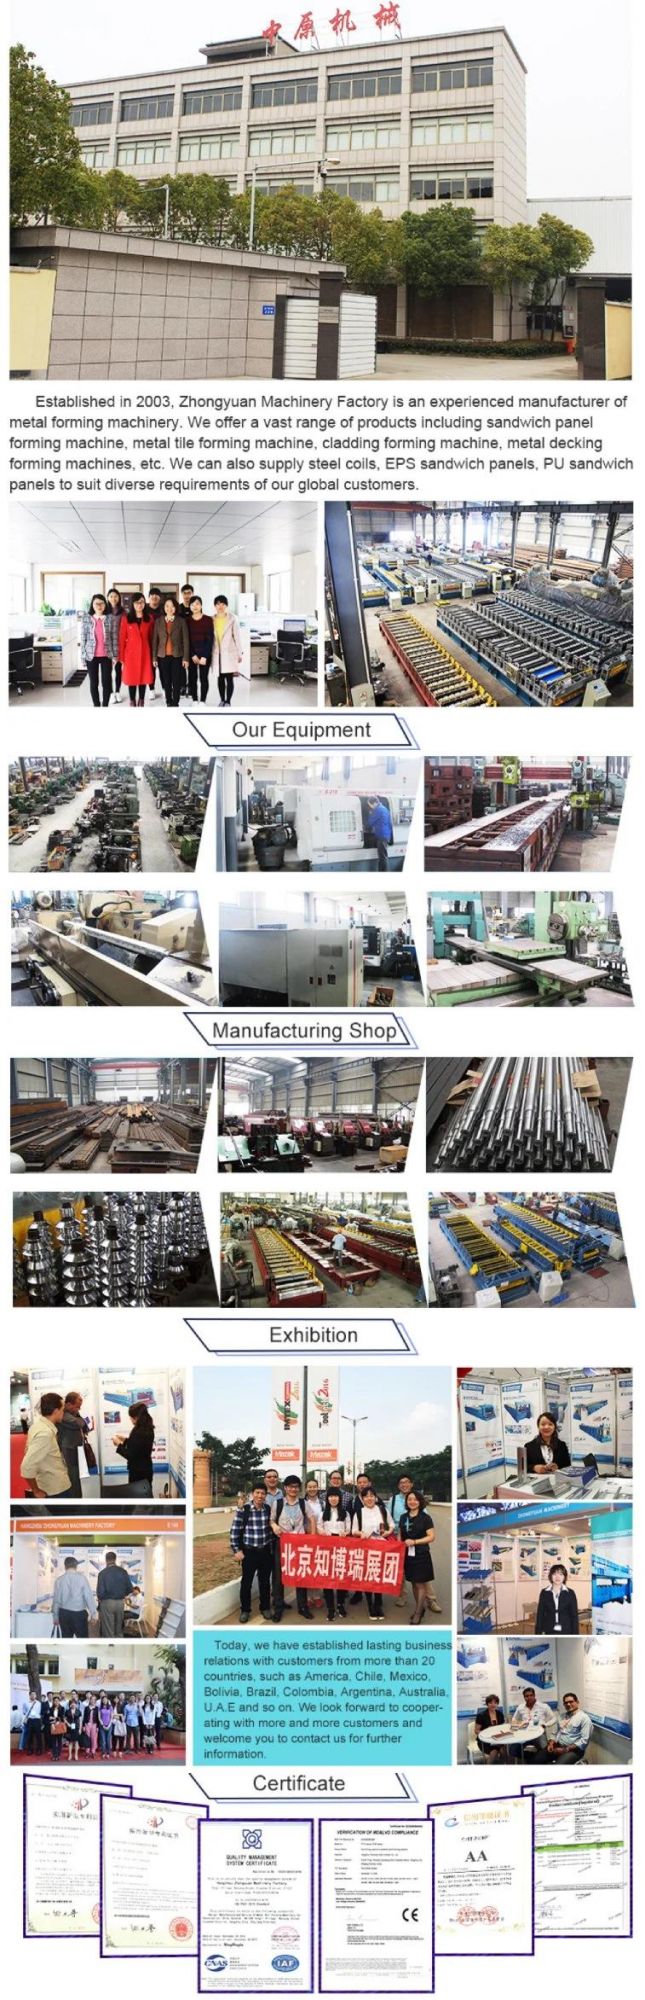 Galvanized Steel Trapezoidal Ibr Metal Roofing Sheet Roll Forming Machines